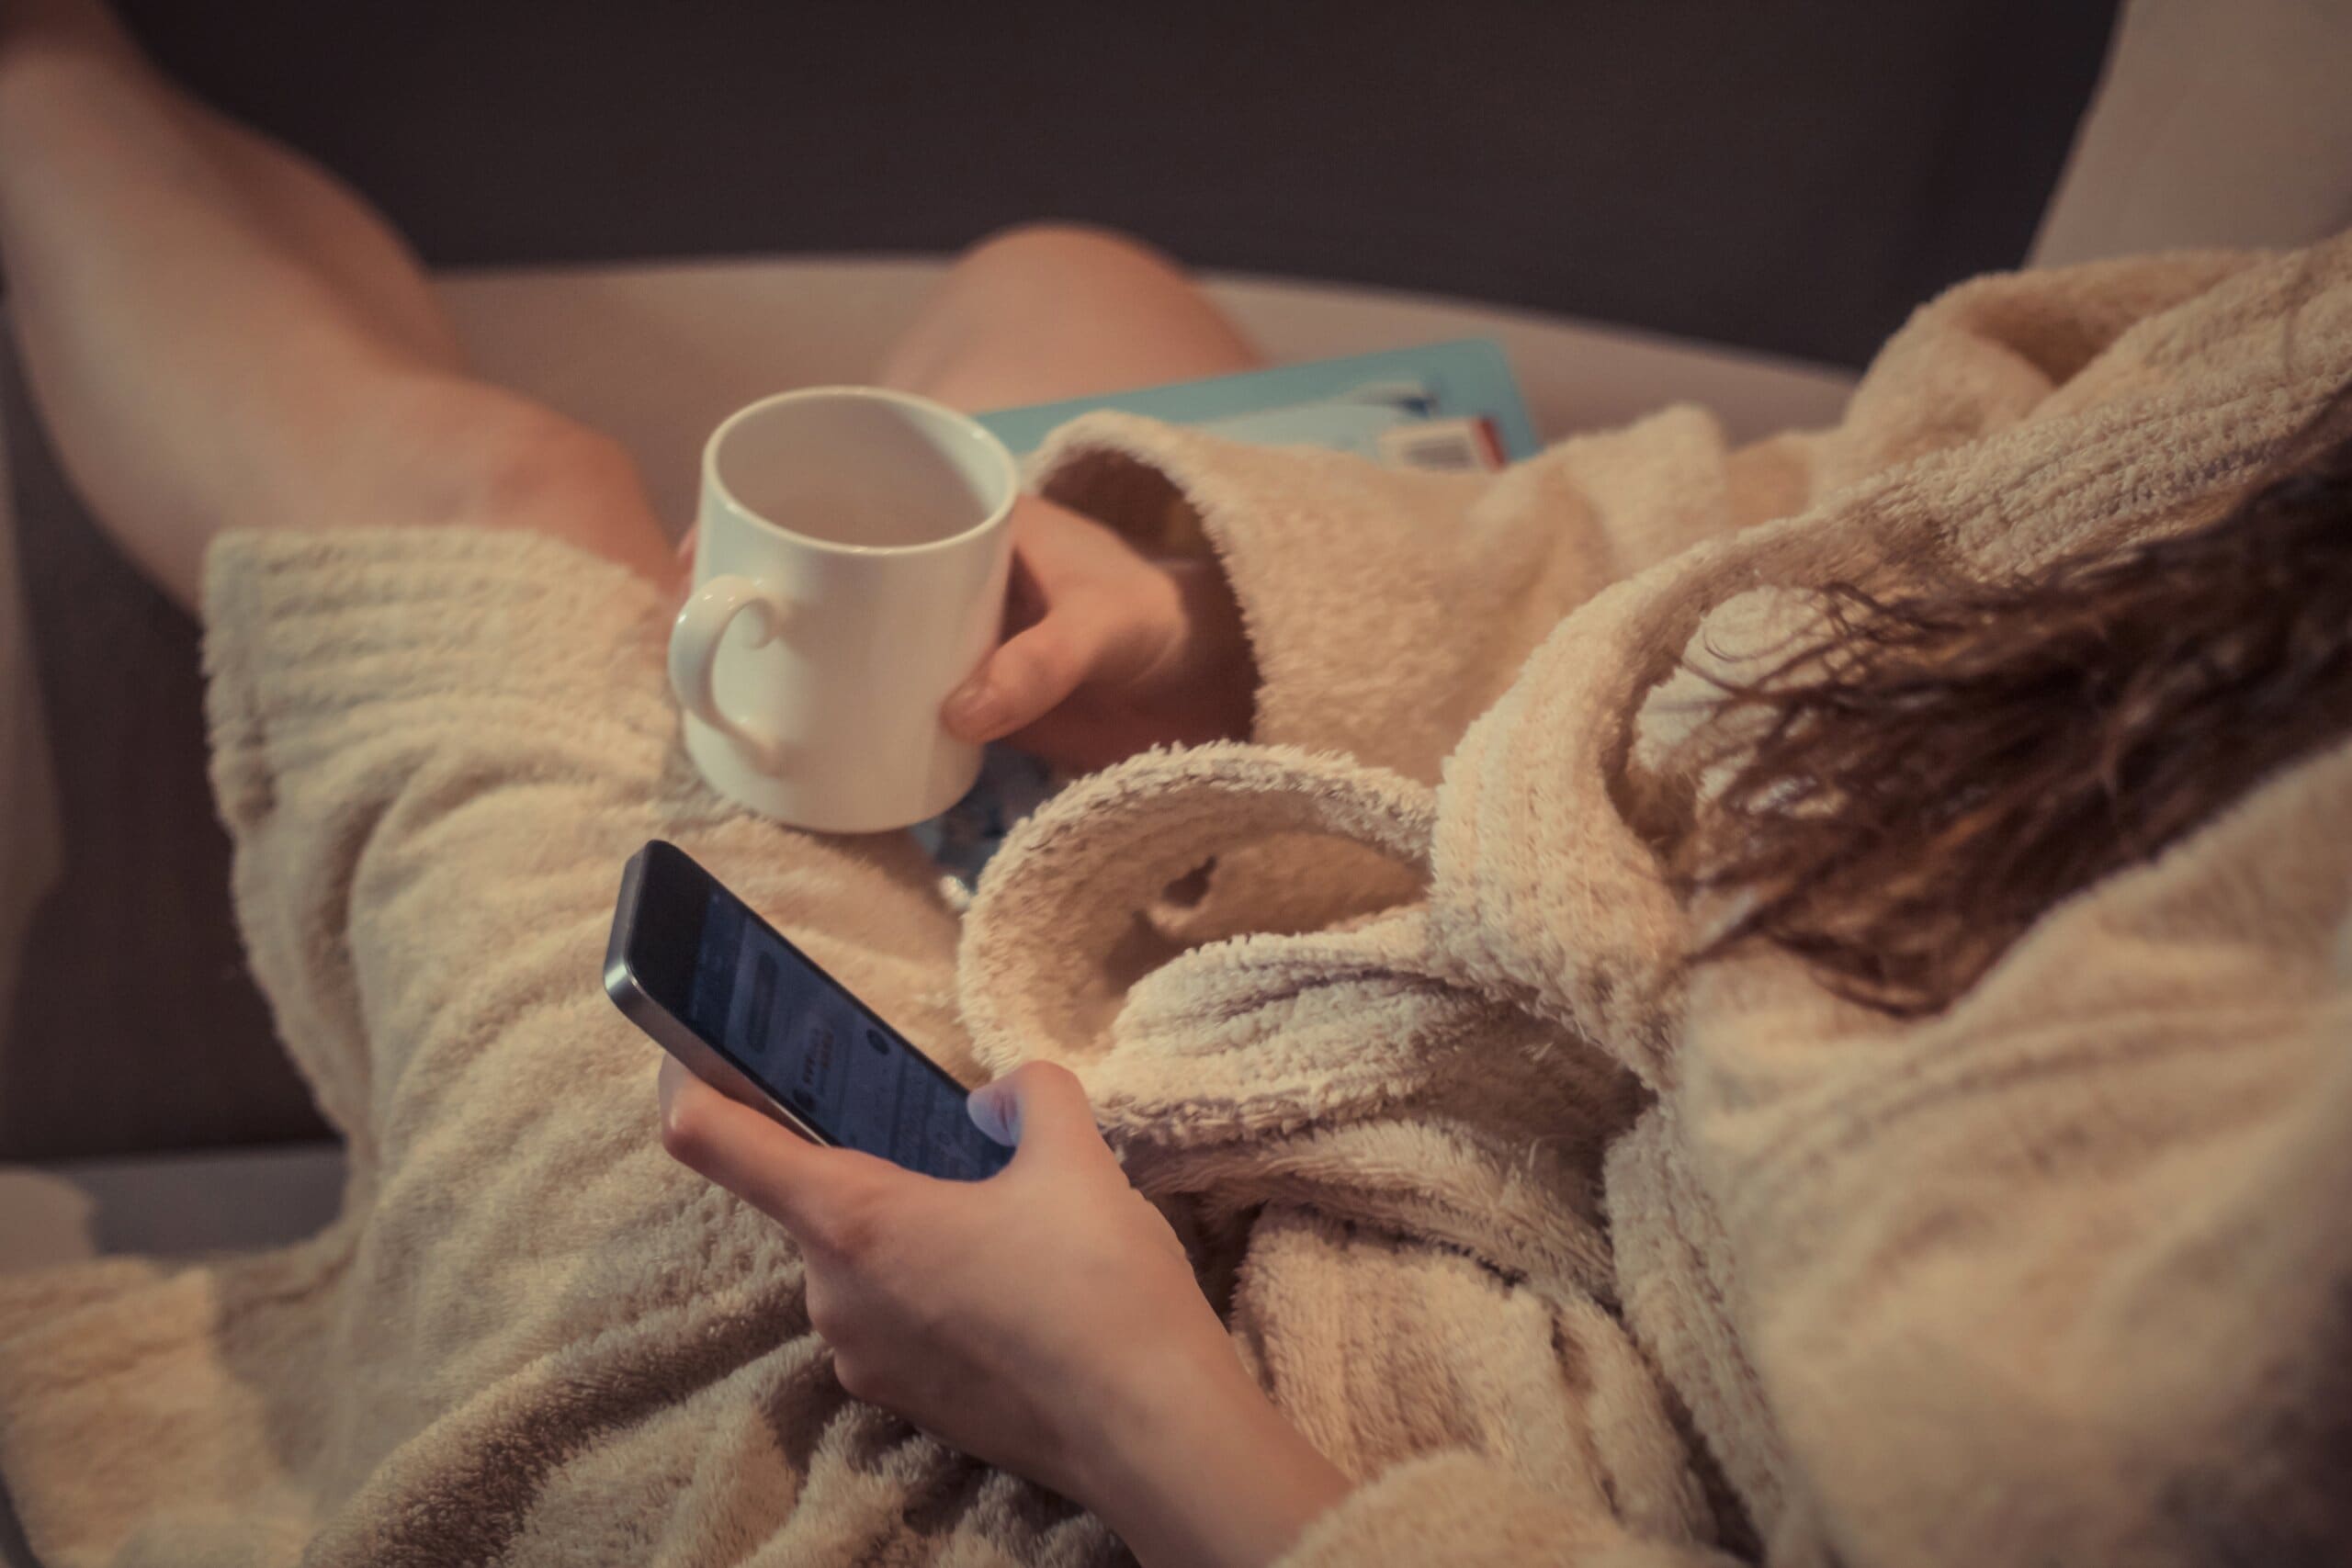 Close up of a woman in a bath robe after an evening shower, holding a mug and mobile phone, relaxing.